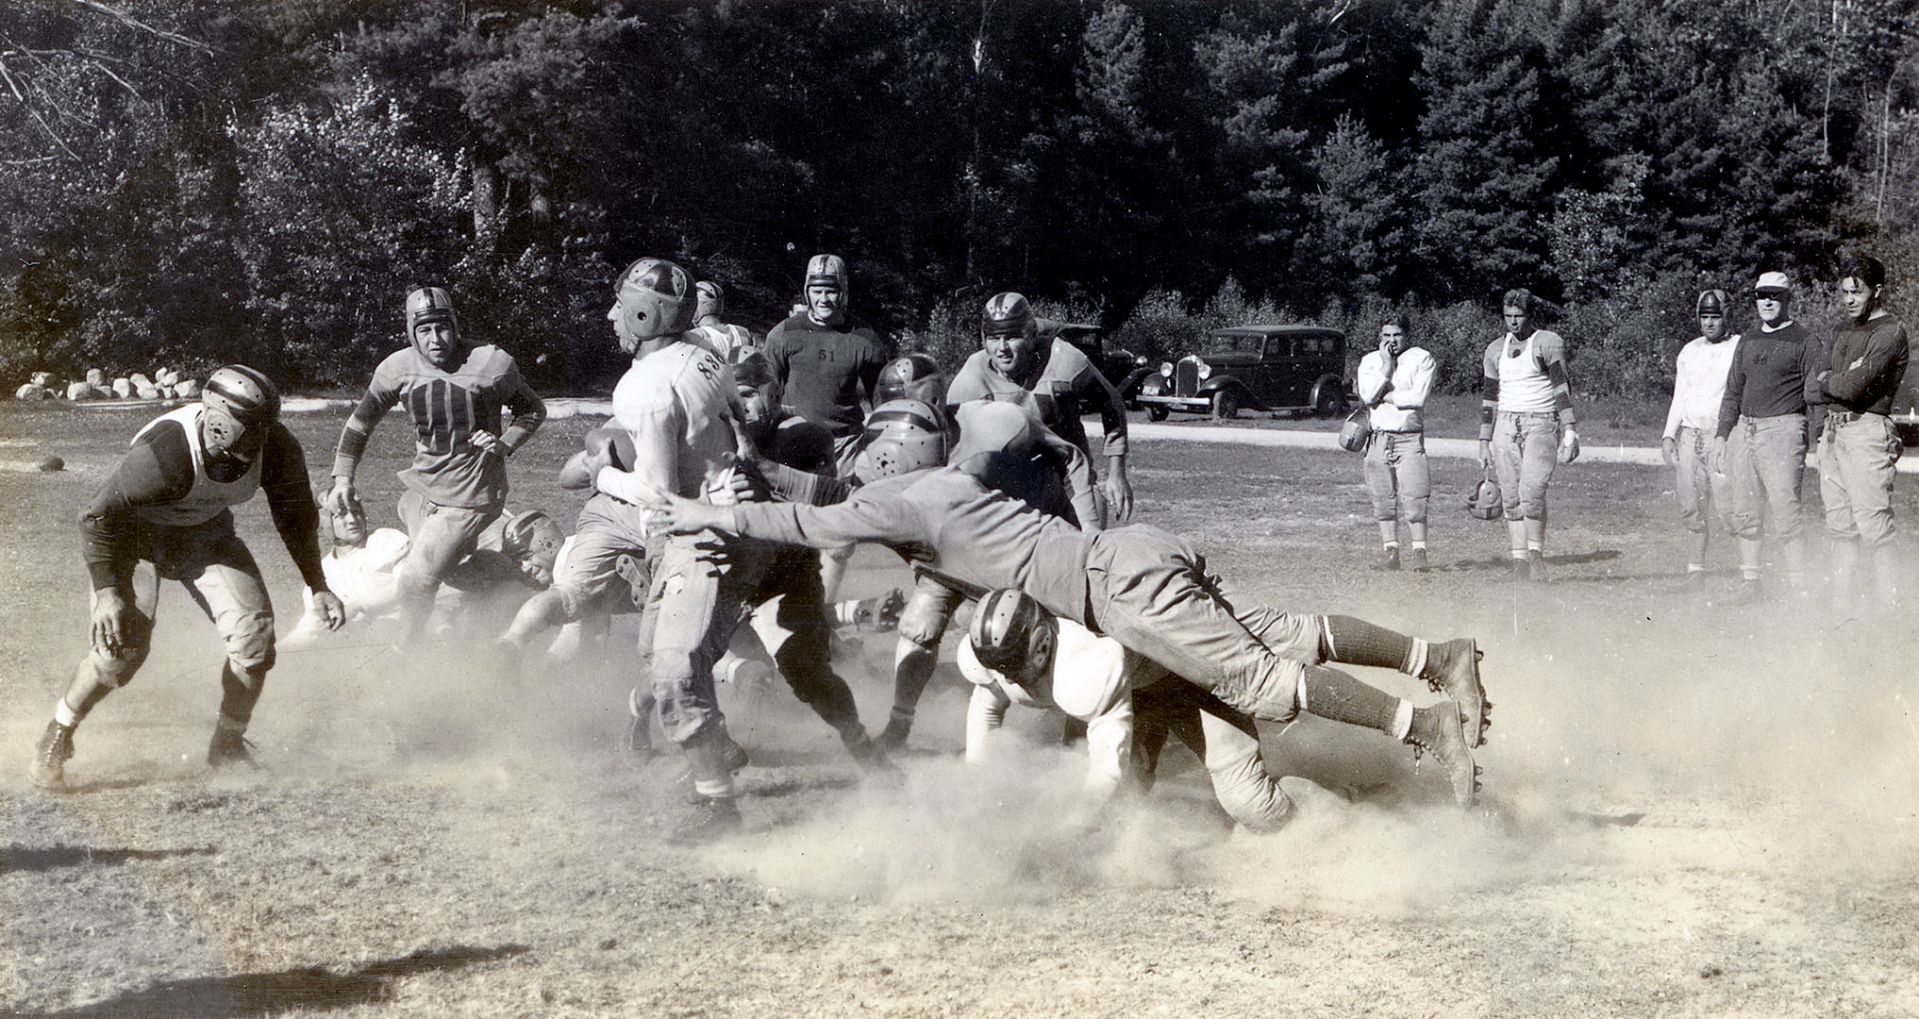 Bates football players do preseason drills at Camp Wonalancet in Easton Center, N.H. The year is likely 1939. (Photograph by Richard Bowers Oliver)